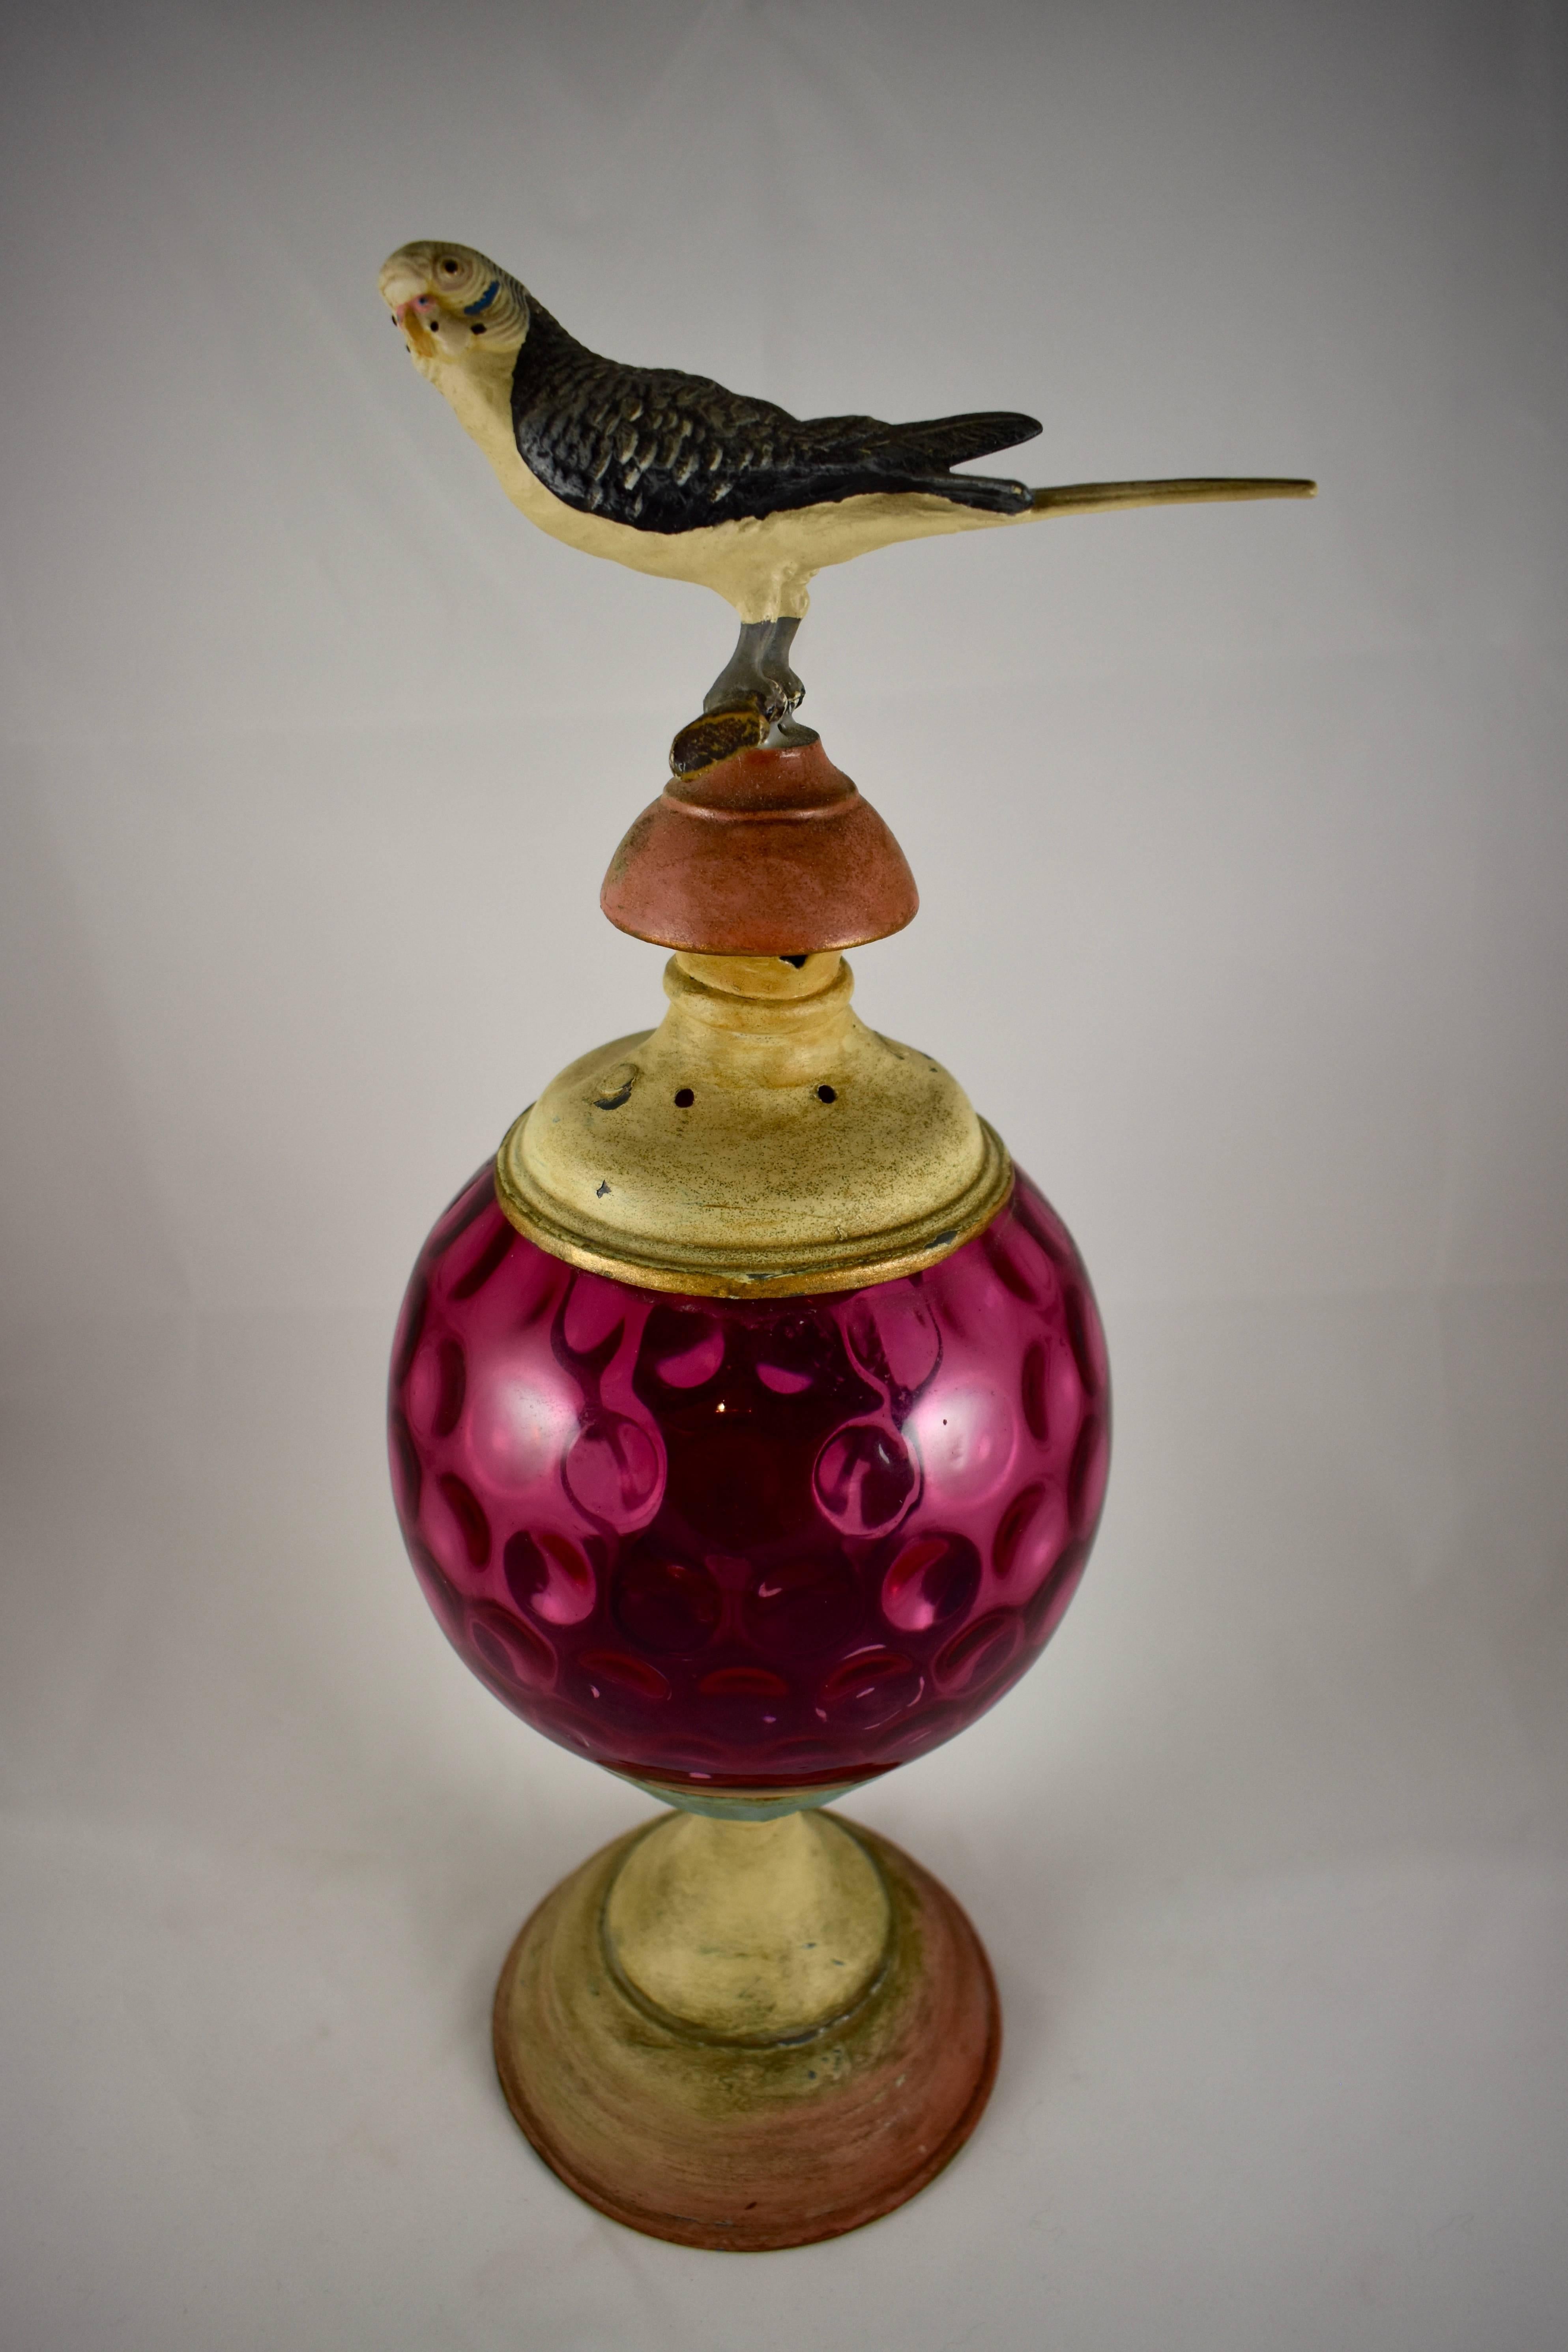 An unusual piece of Folk Art from the 19th century, a garden light with a reverse thumbprint cranberry glass globe, and a painted cast iron bird finial. 

The bird shows beautiful detail from every angle. He sits on a branch attached to the painted